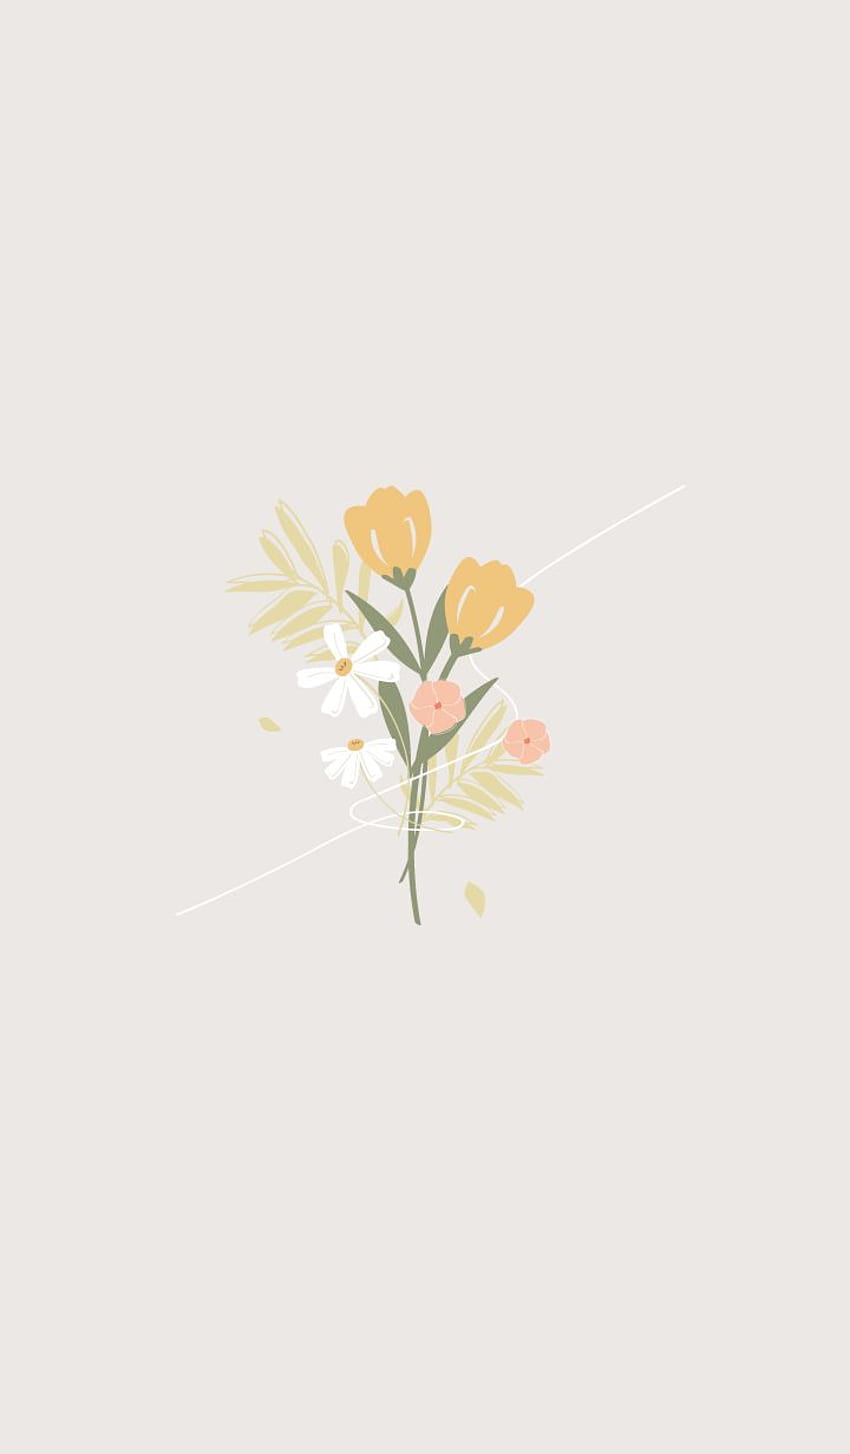 A small bouquet of flowers on a light background - Simple